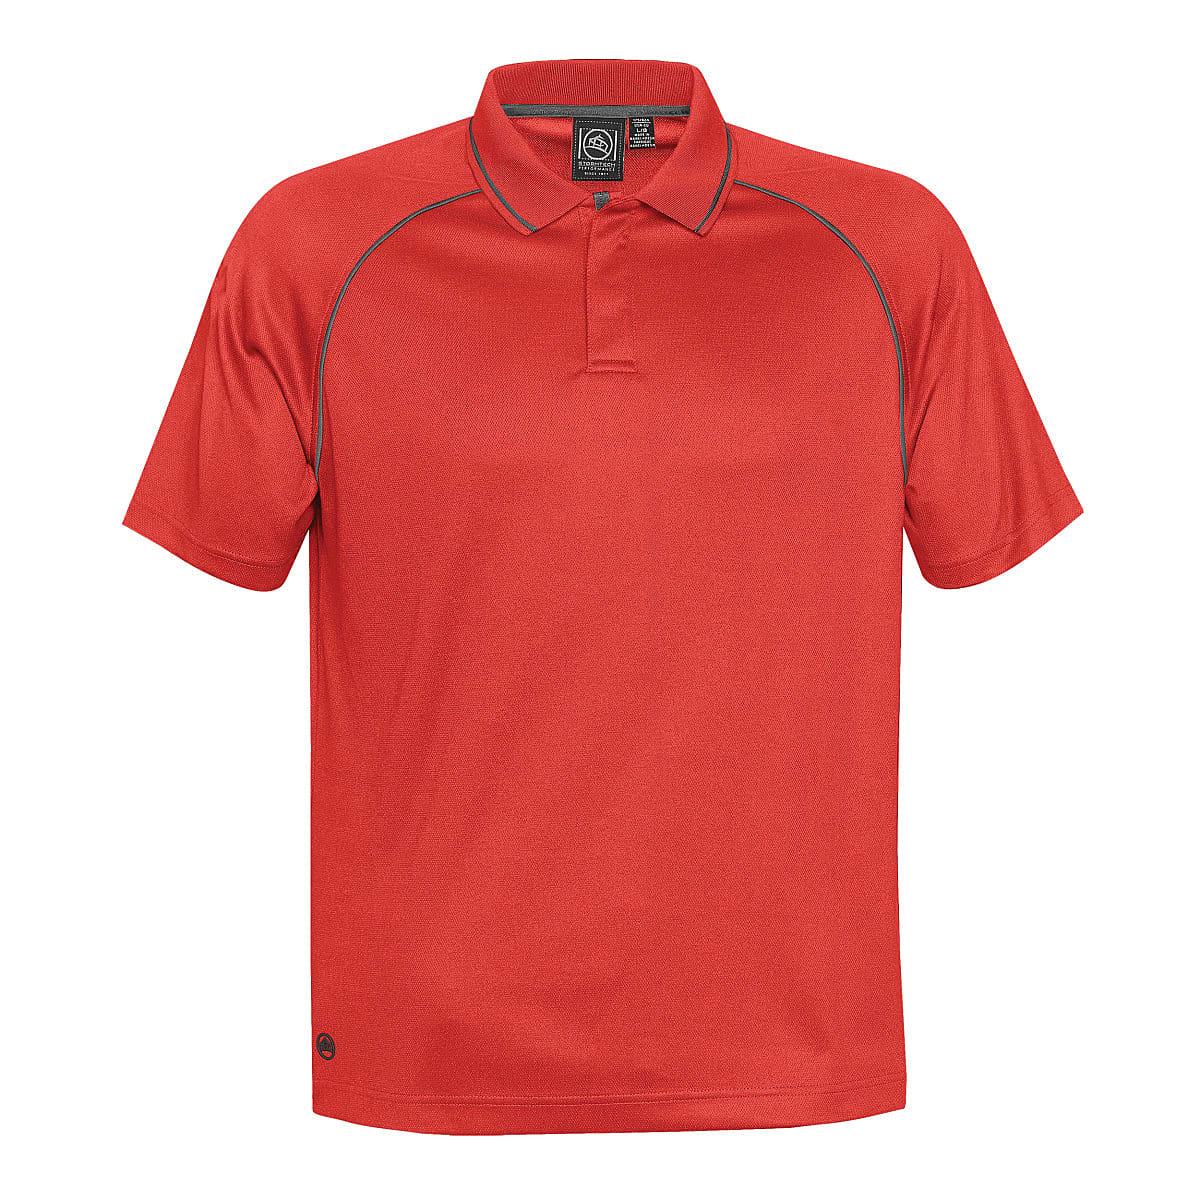 Stormtech Mens Tritium Polo Shirt in Bright Red / Carbon (Product Code: GPX-4)